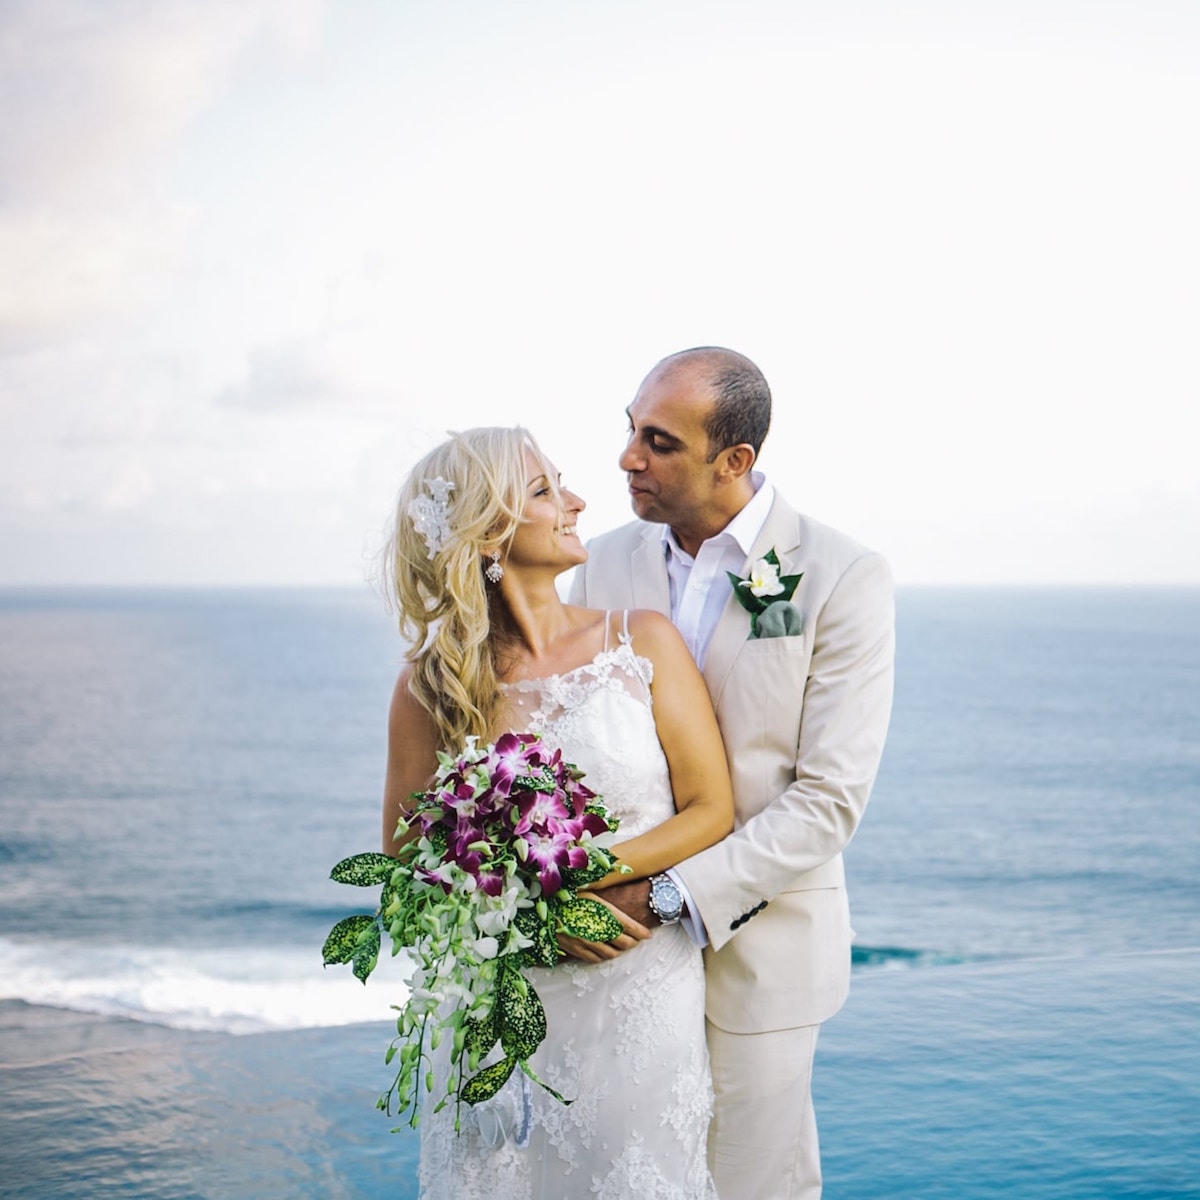 Bali Clifftop Wedding - Bride and Groom with Ocean Background photo shoot